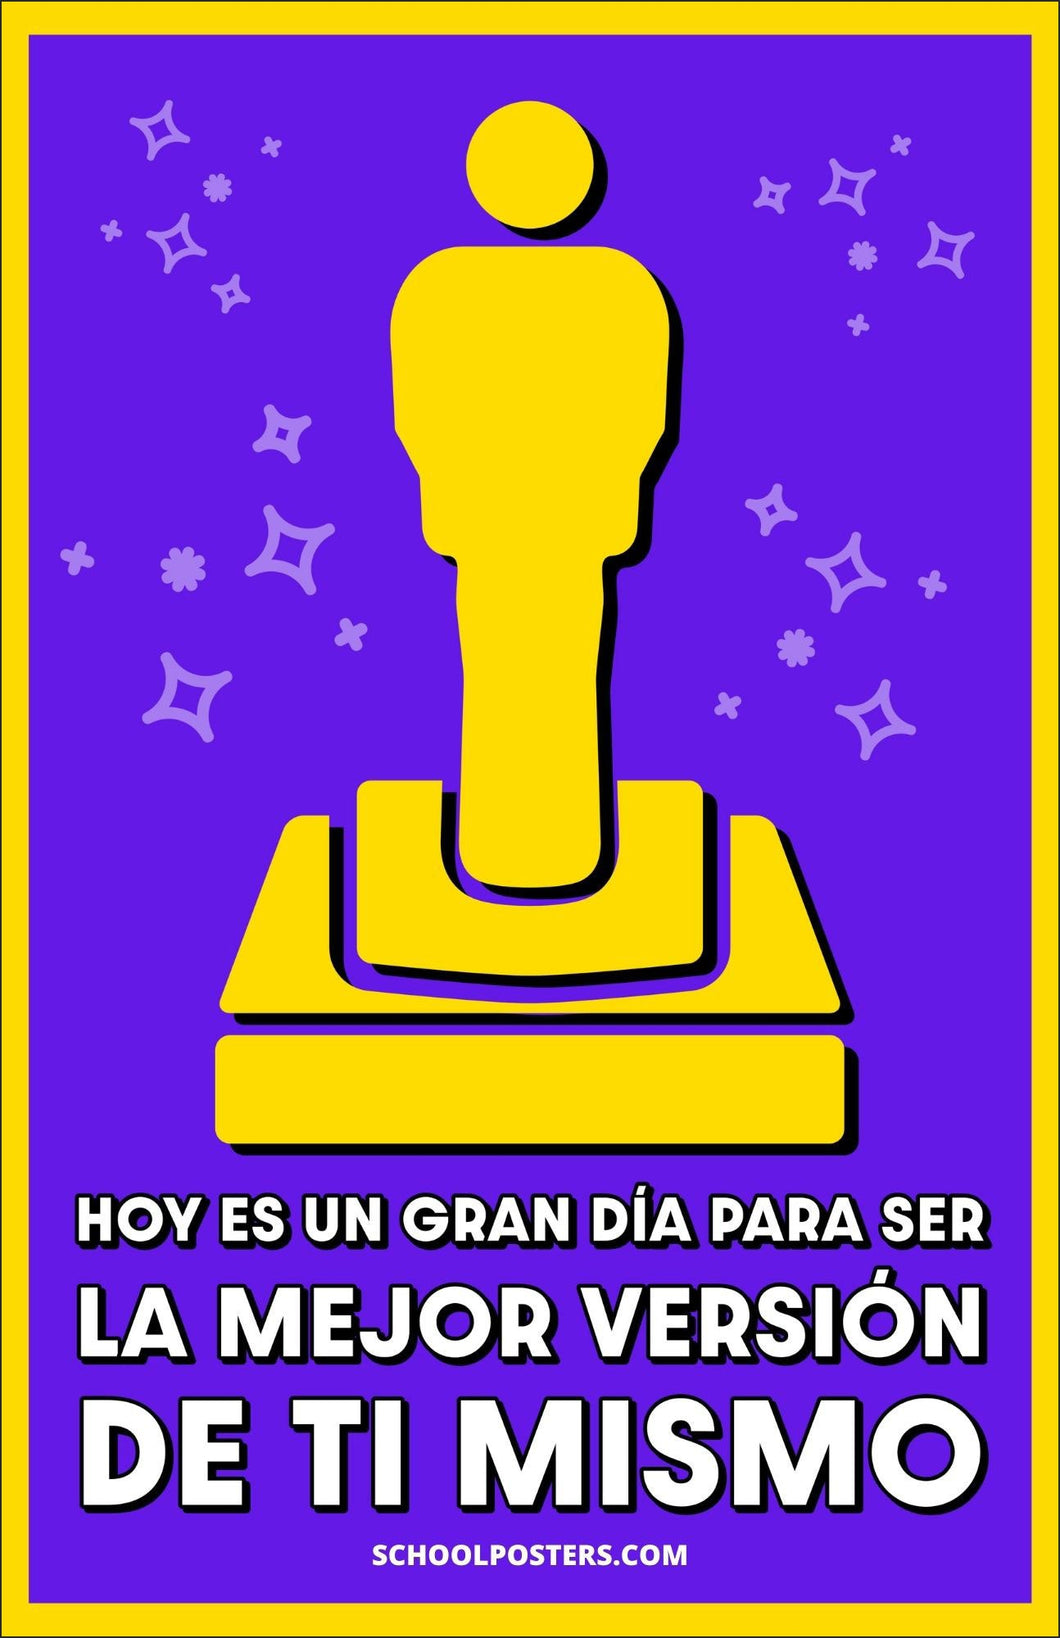 Spanish: Best Version Of Yourself Poster